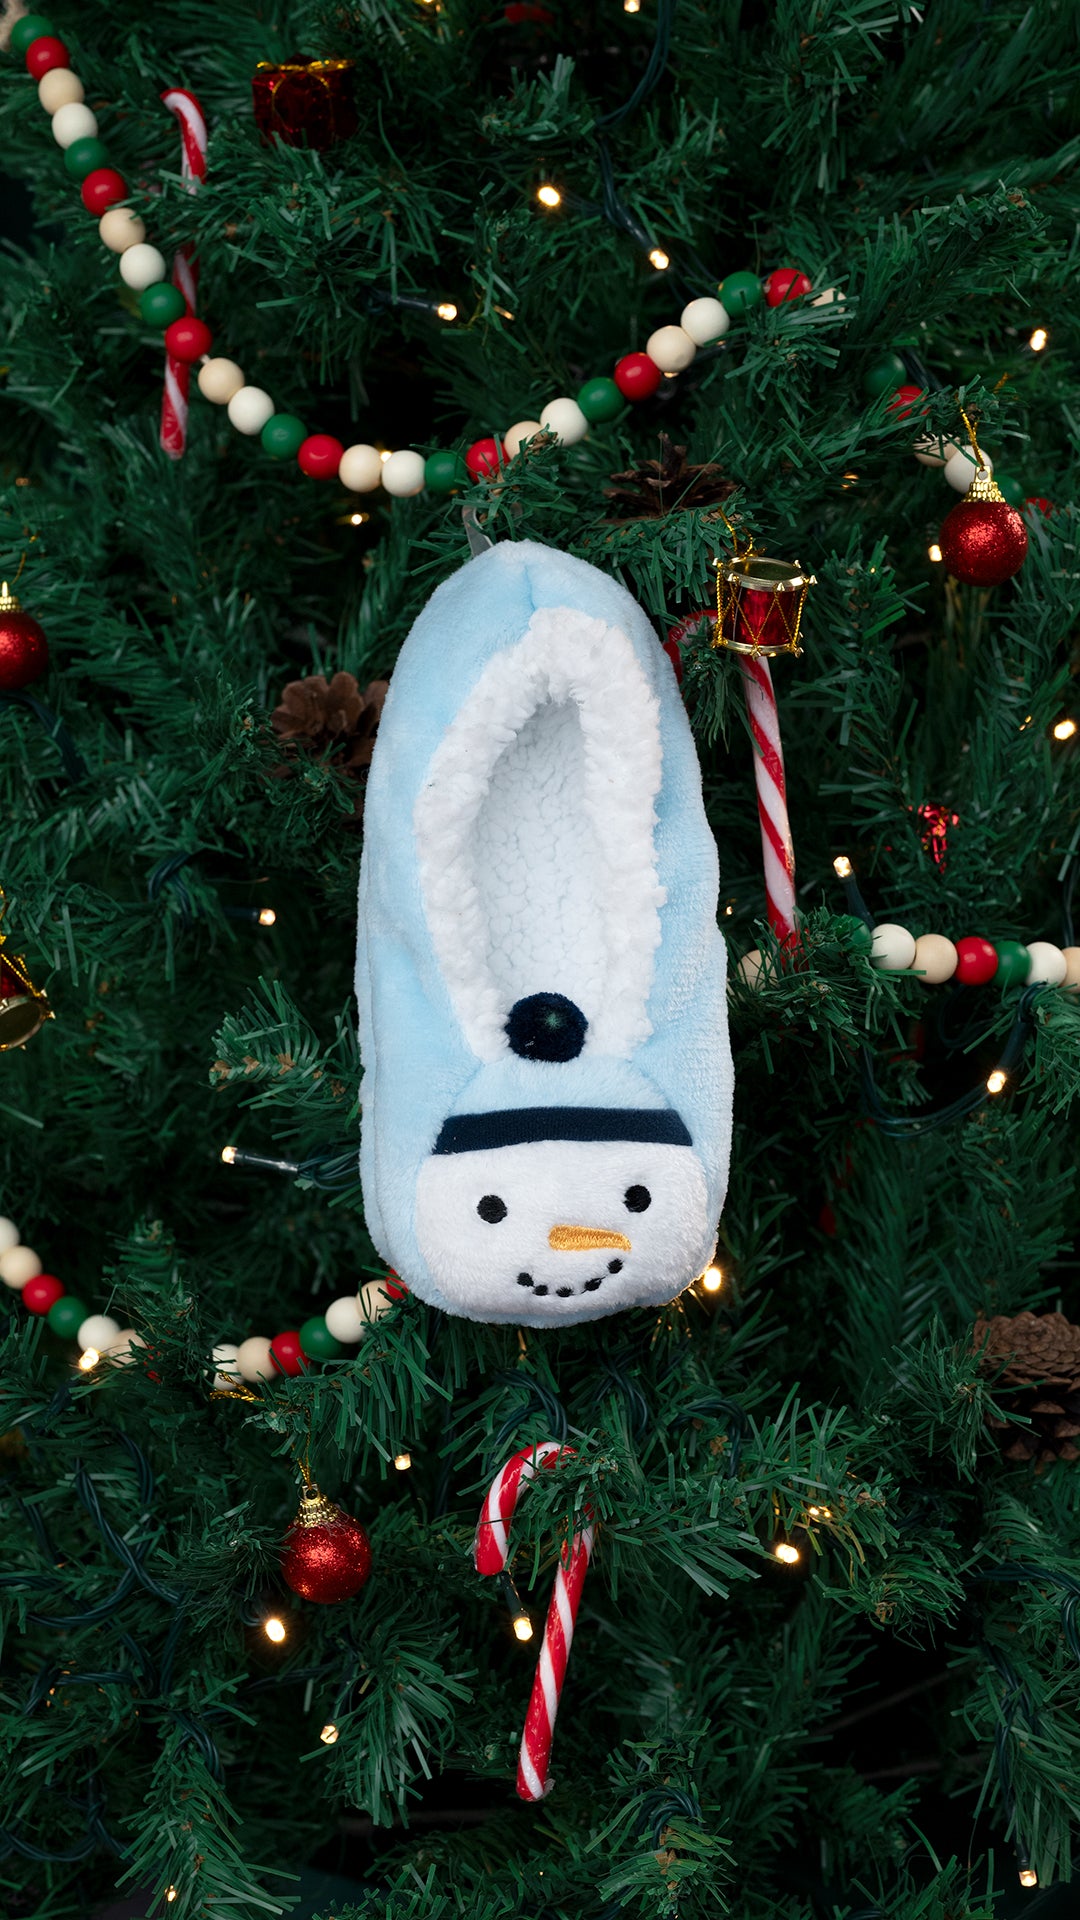 Holiday Softie Kids Slippers